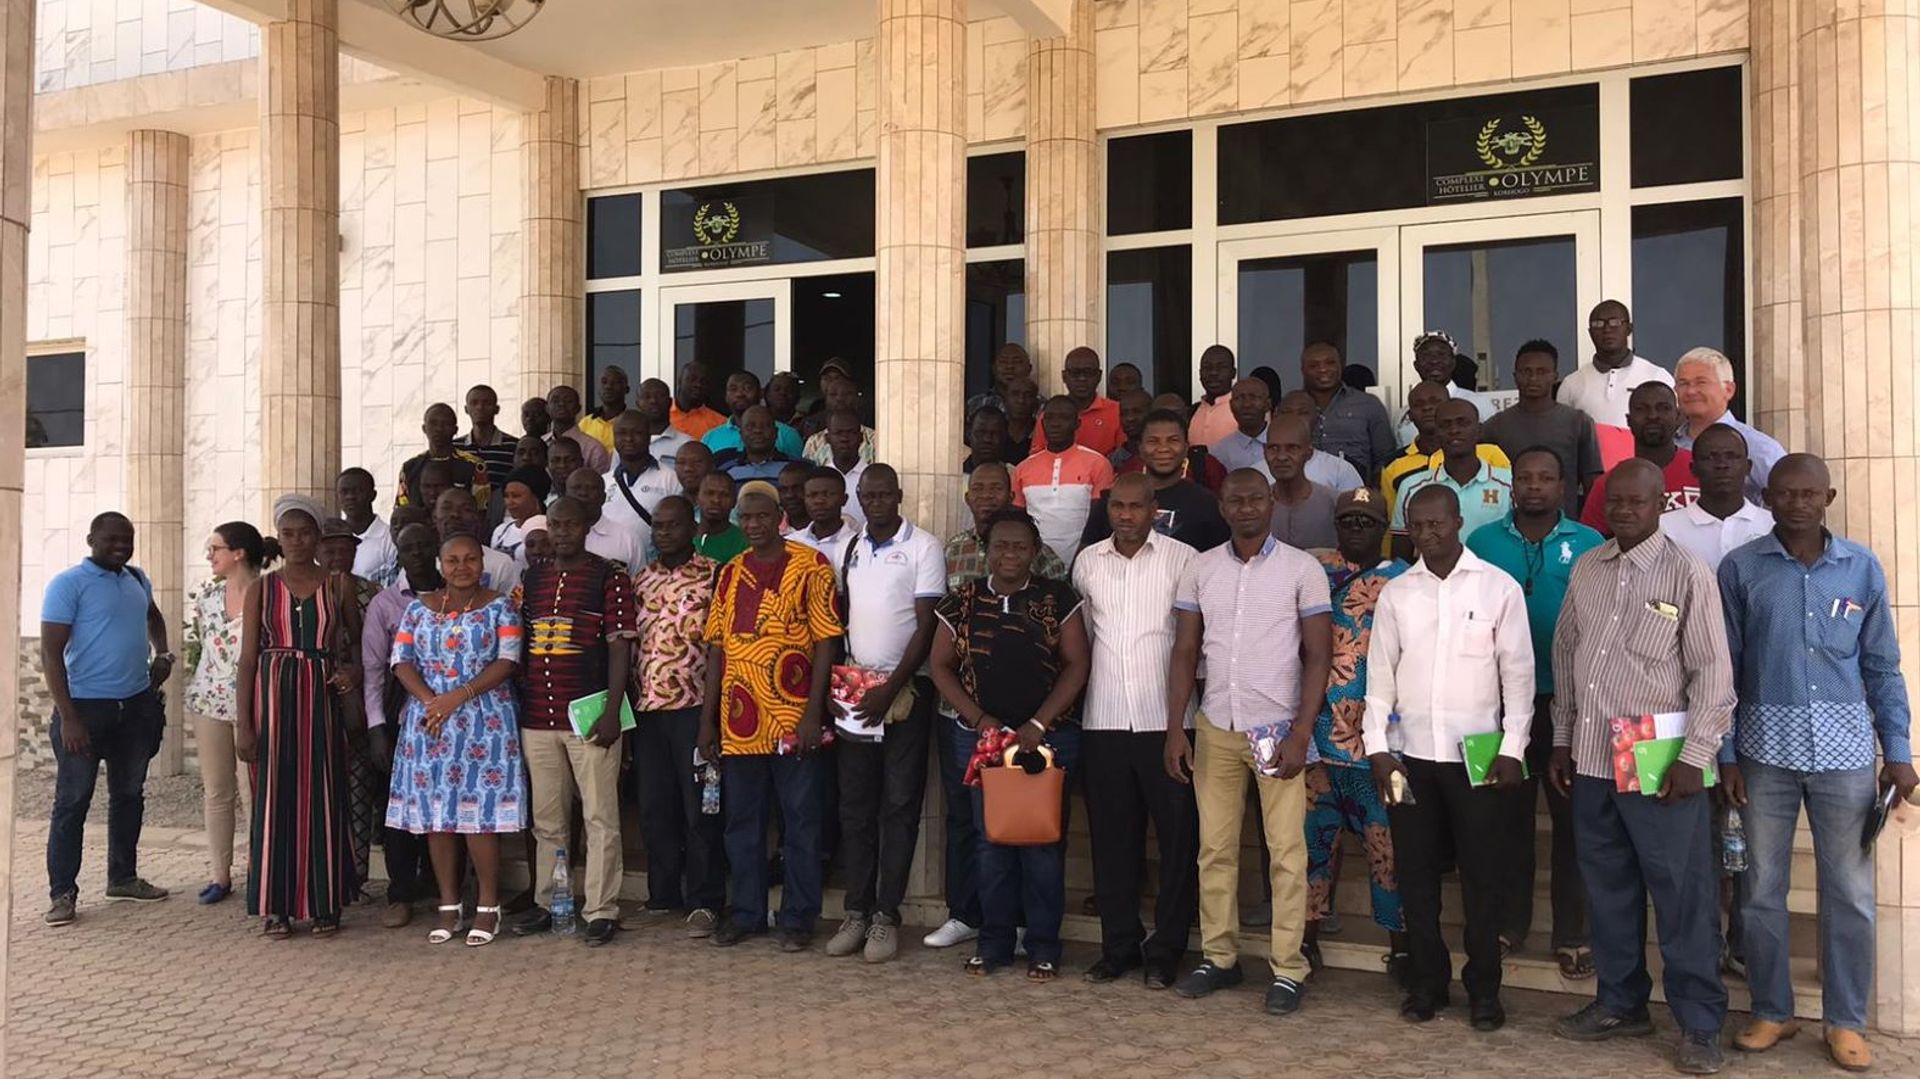 Image of participants at the 2020 TOUR stop in Ivory Coast